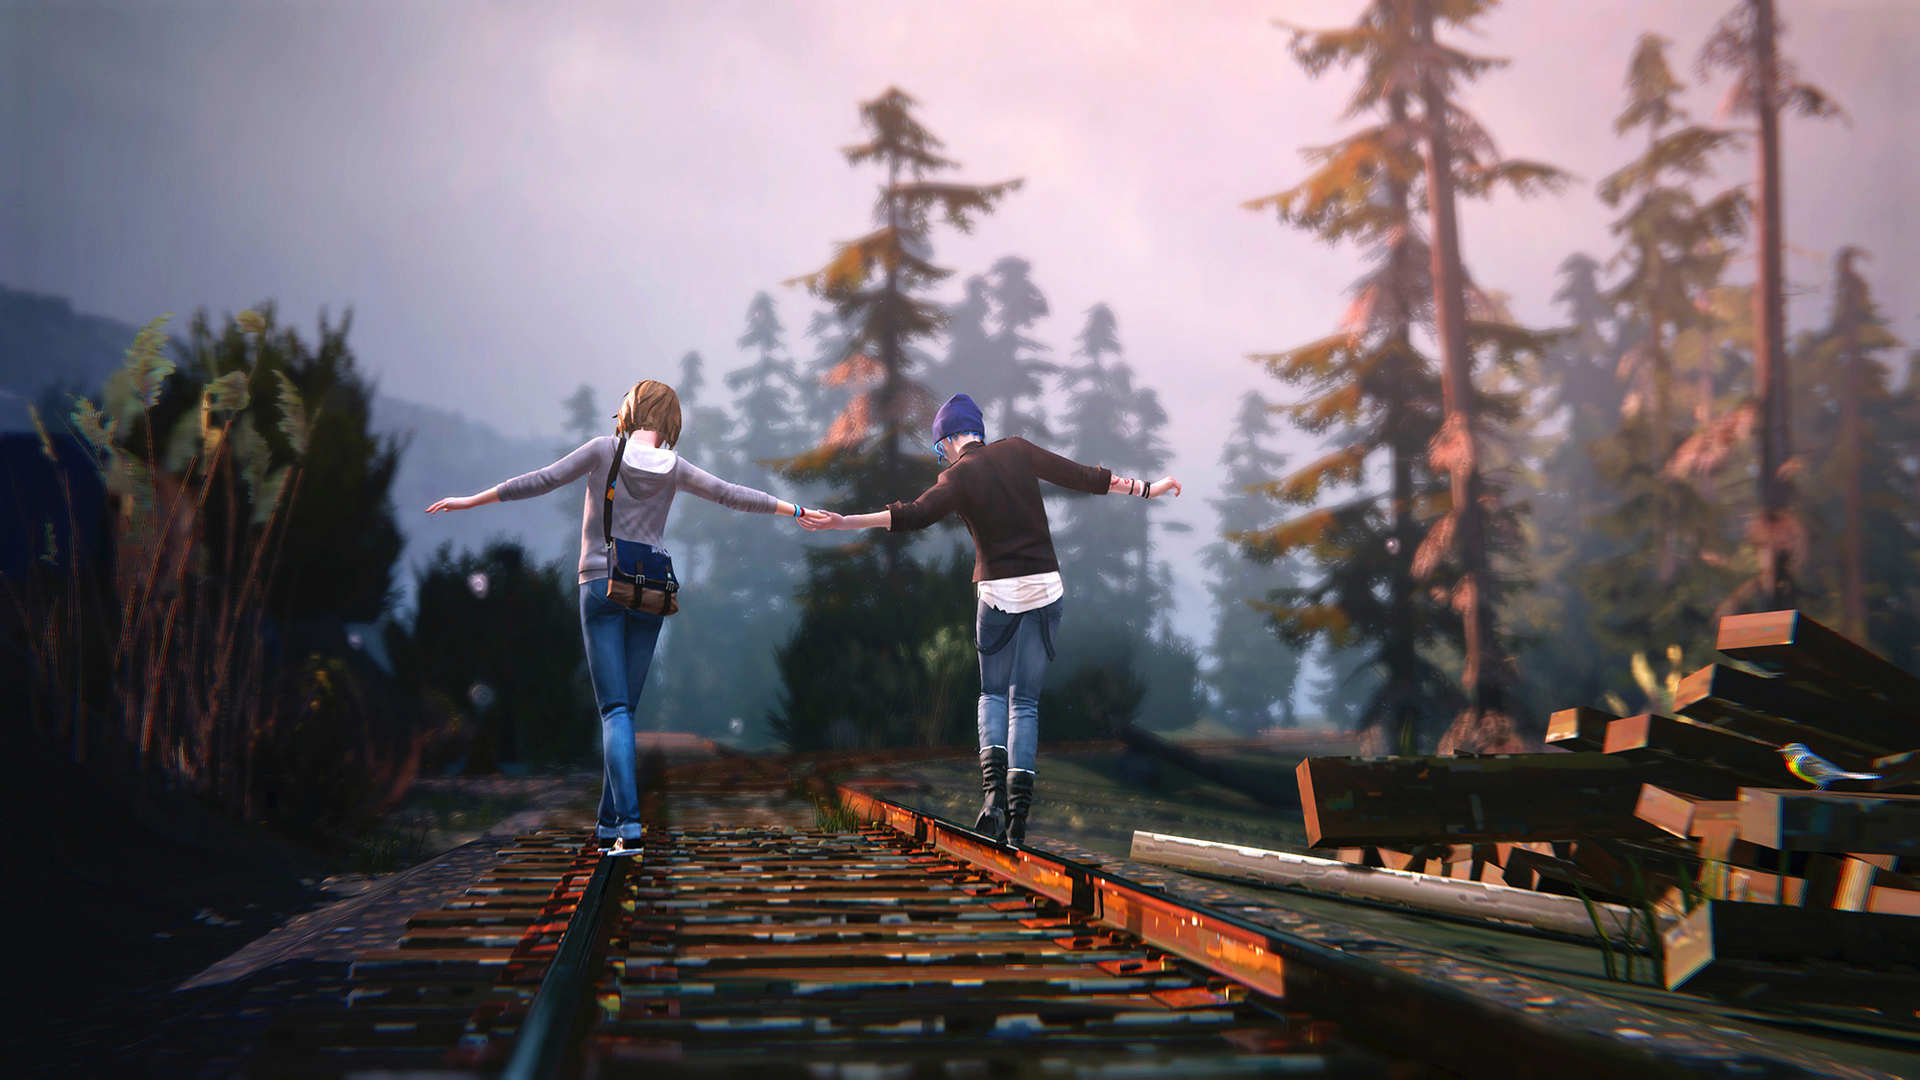 Beautiful Life Is Strange Wallpaper Full HD Pictures